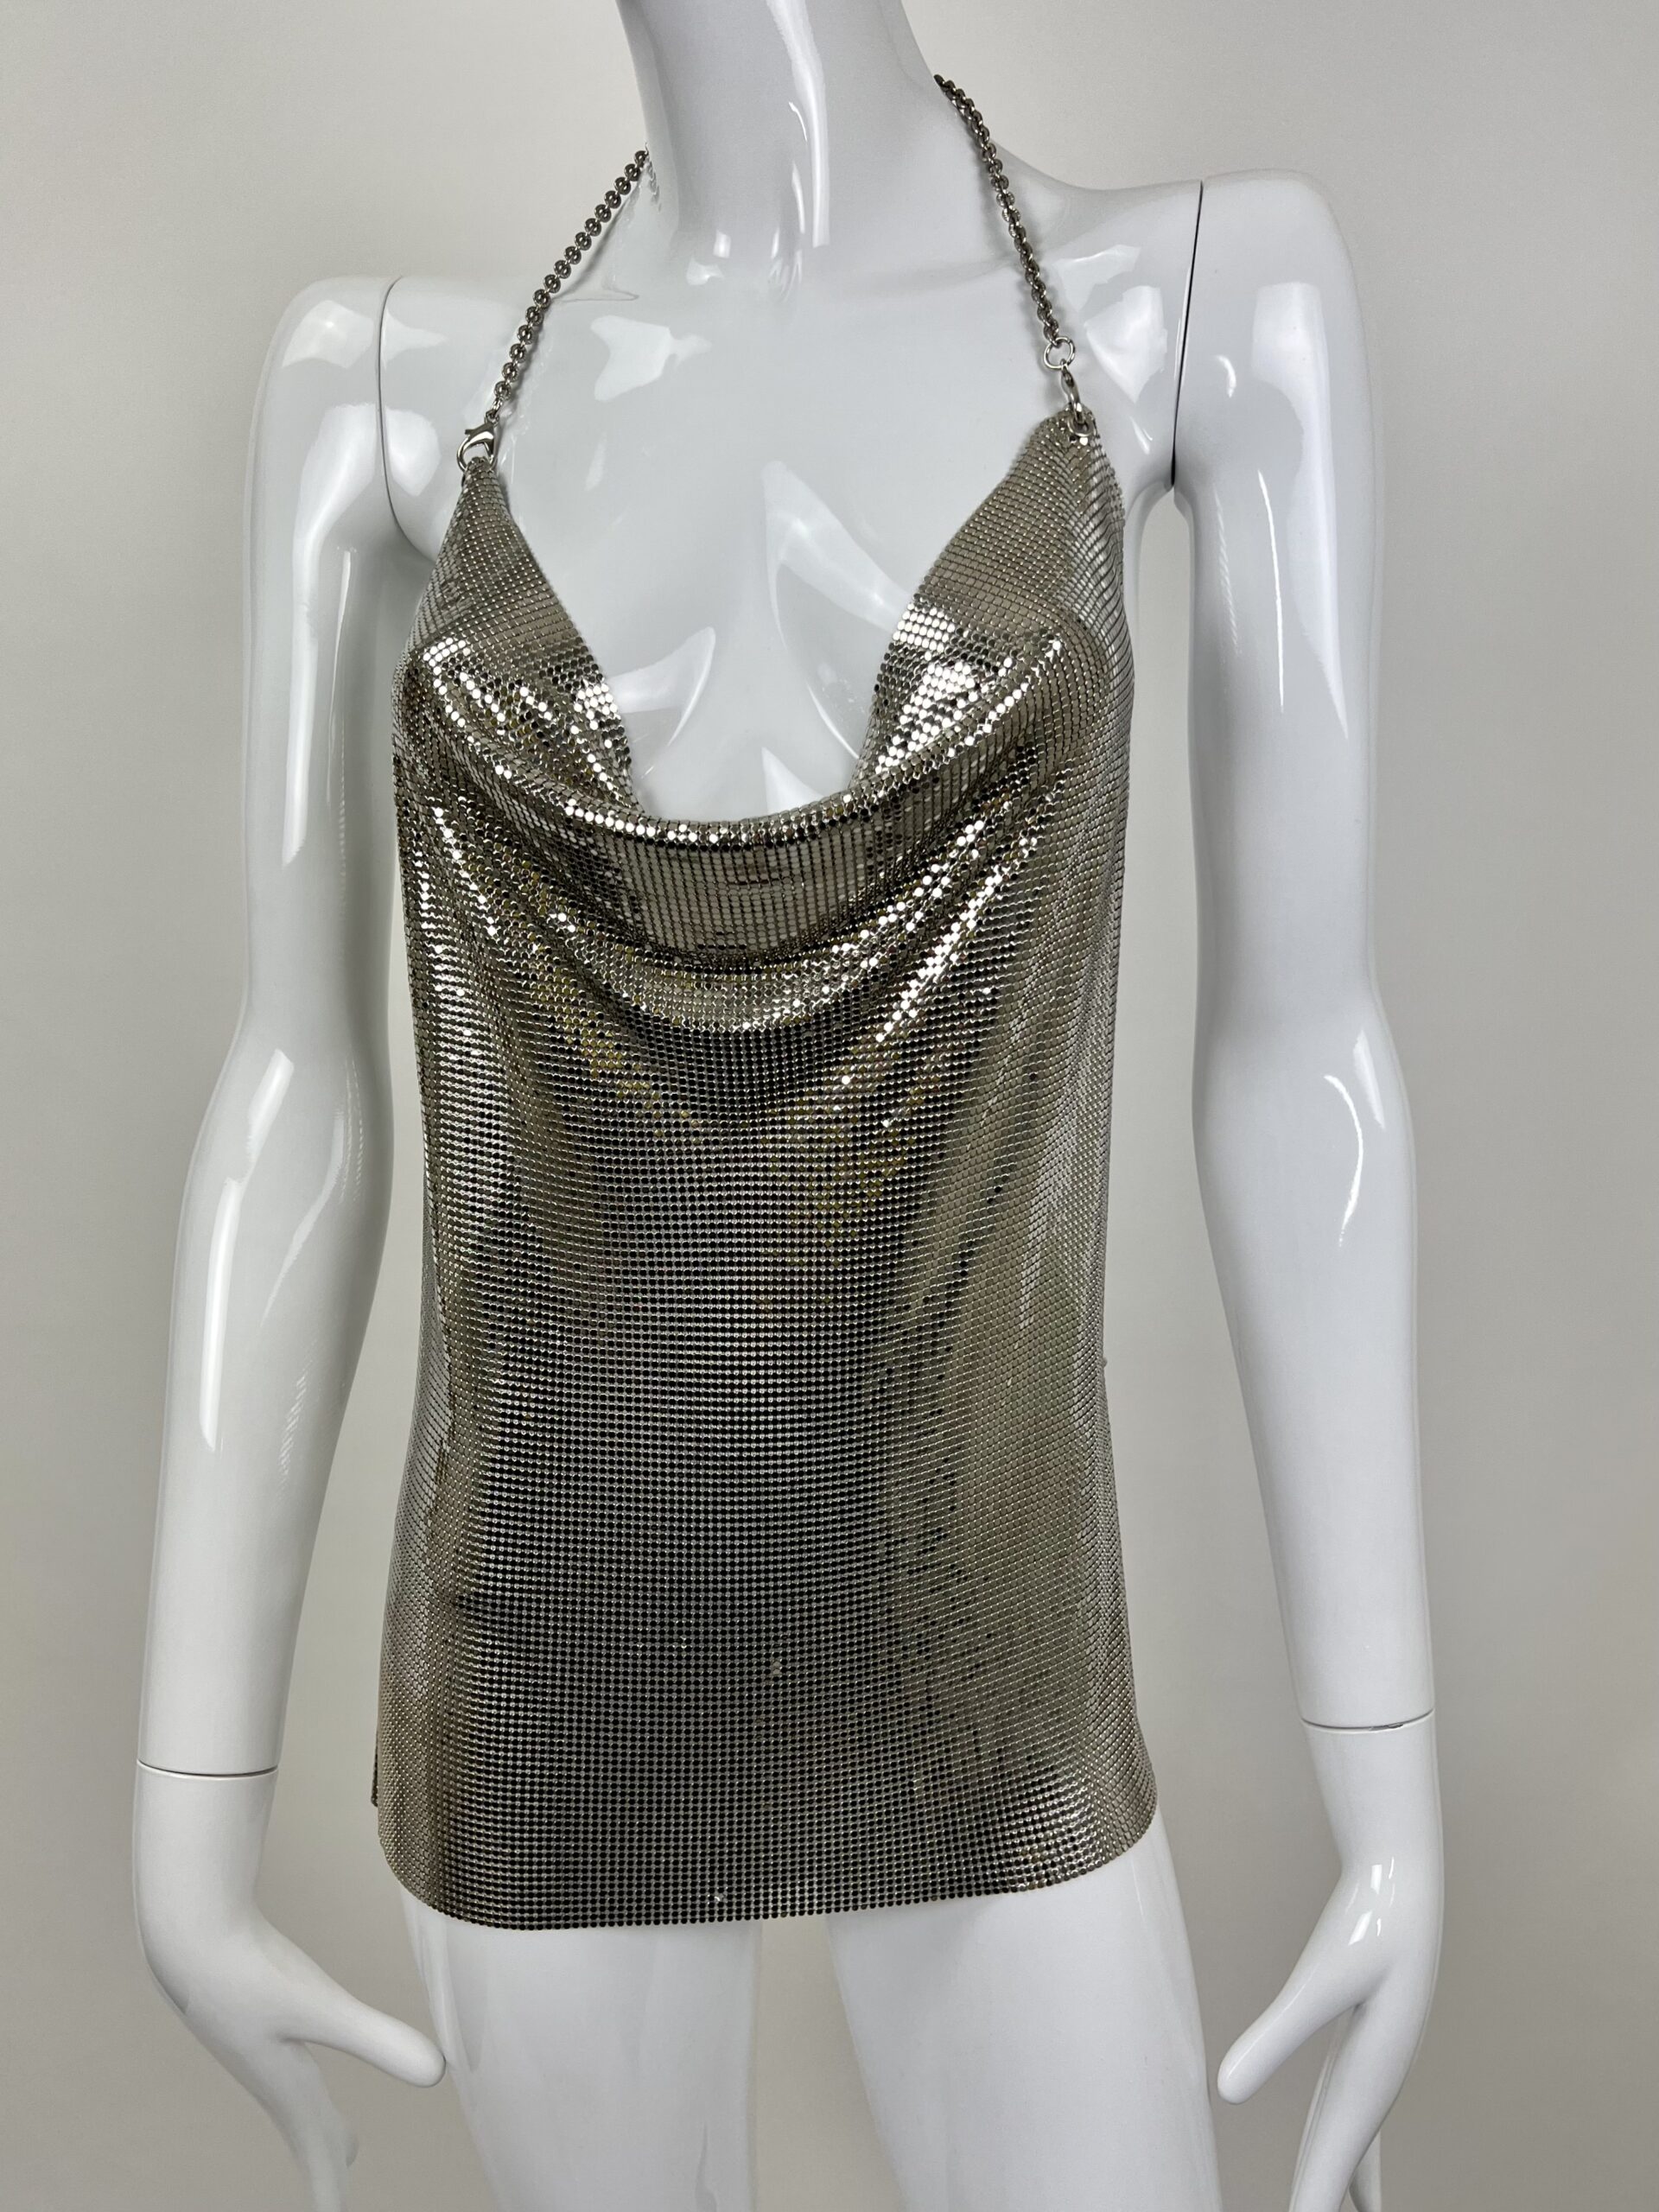 Cowl Neck Chainmail Apron Top - Rellik